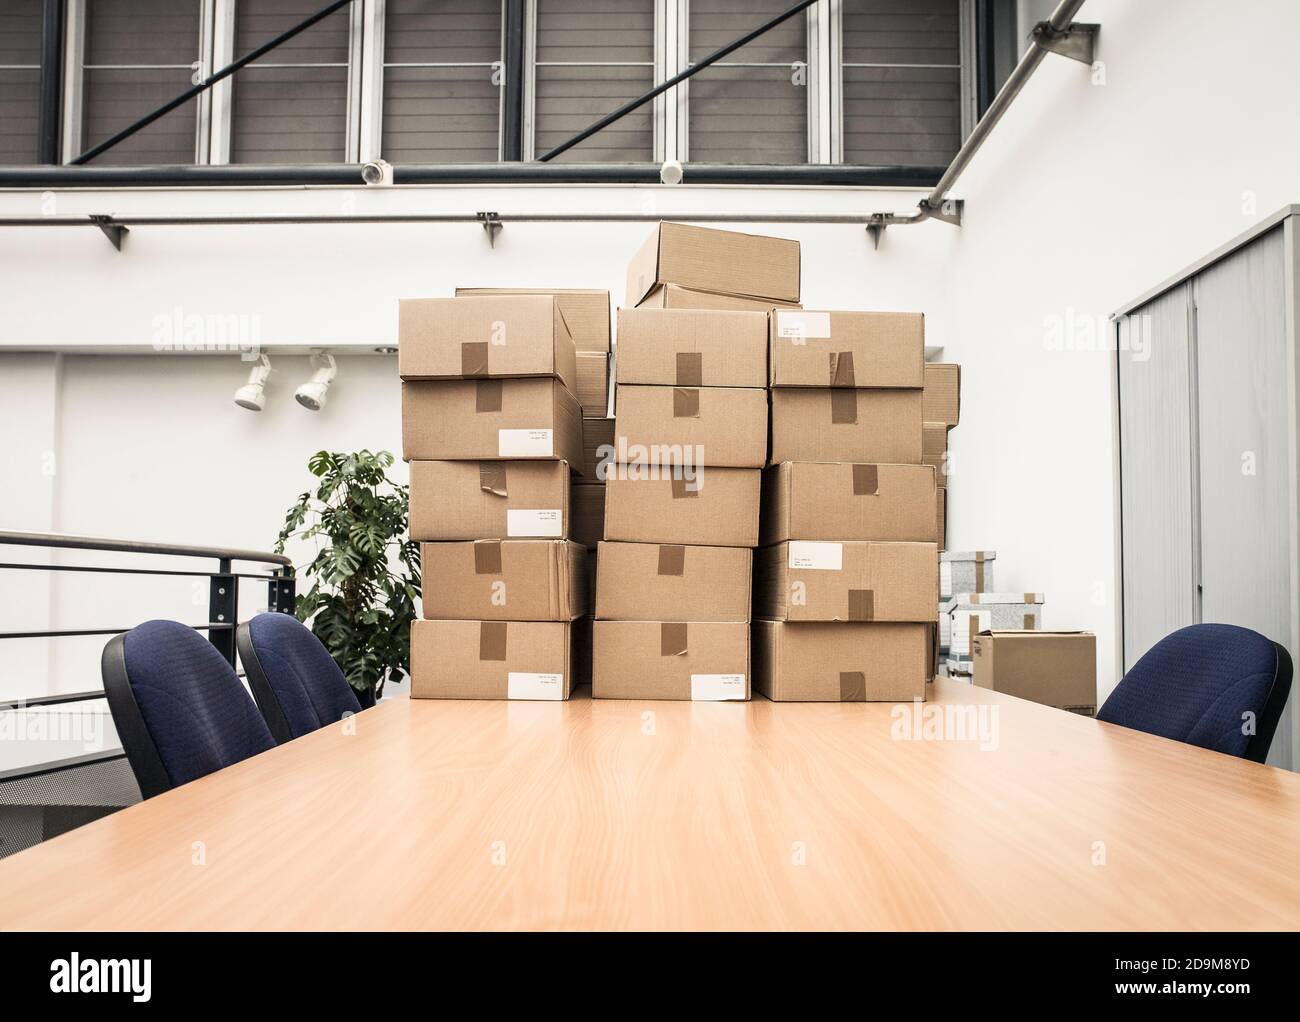 Boxes stacked on office table Stock Photo